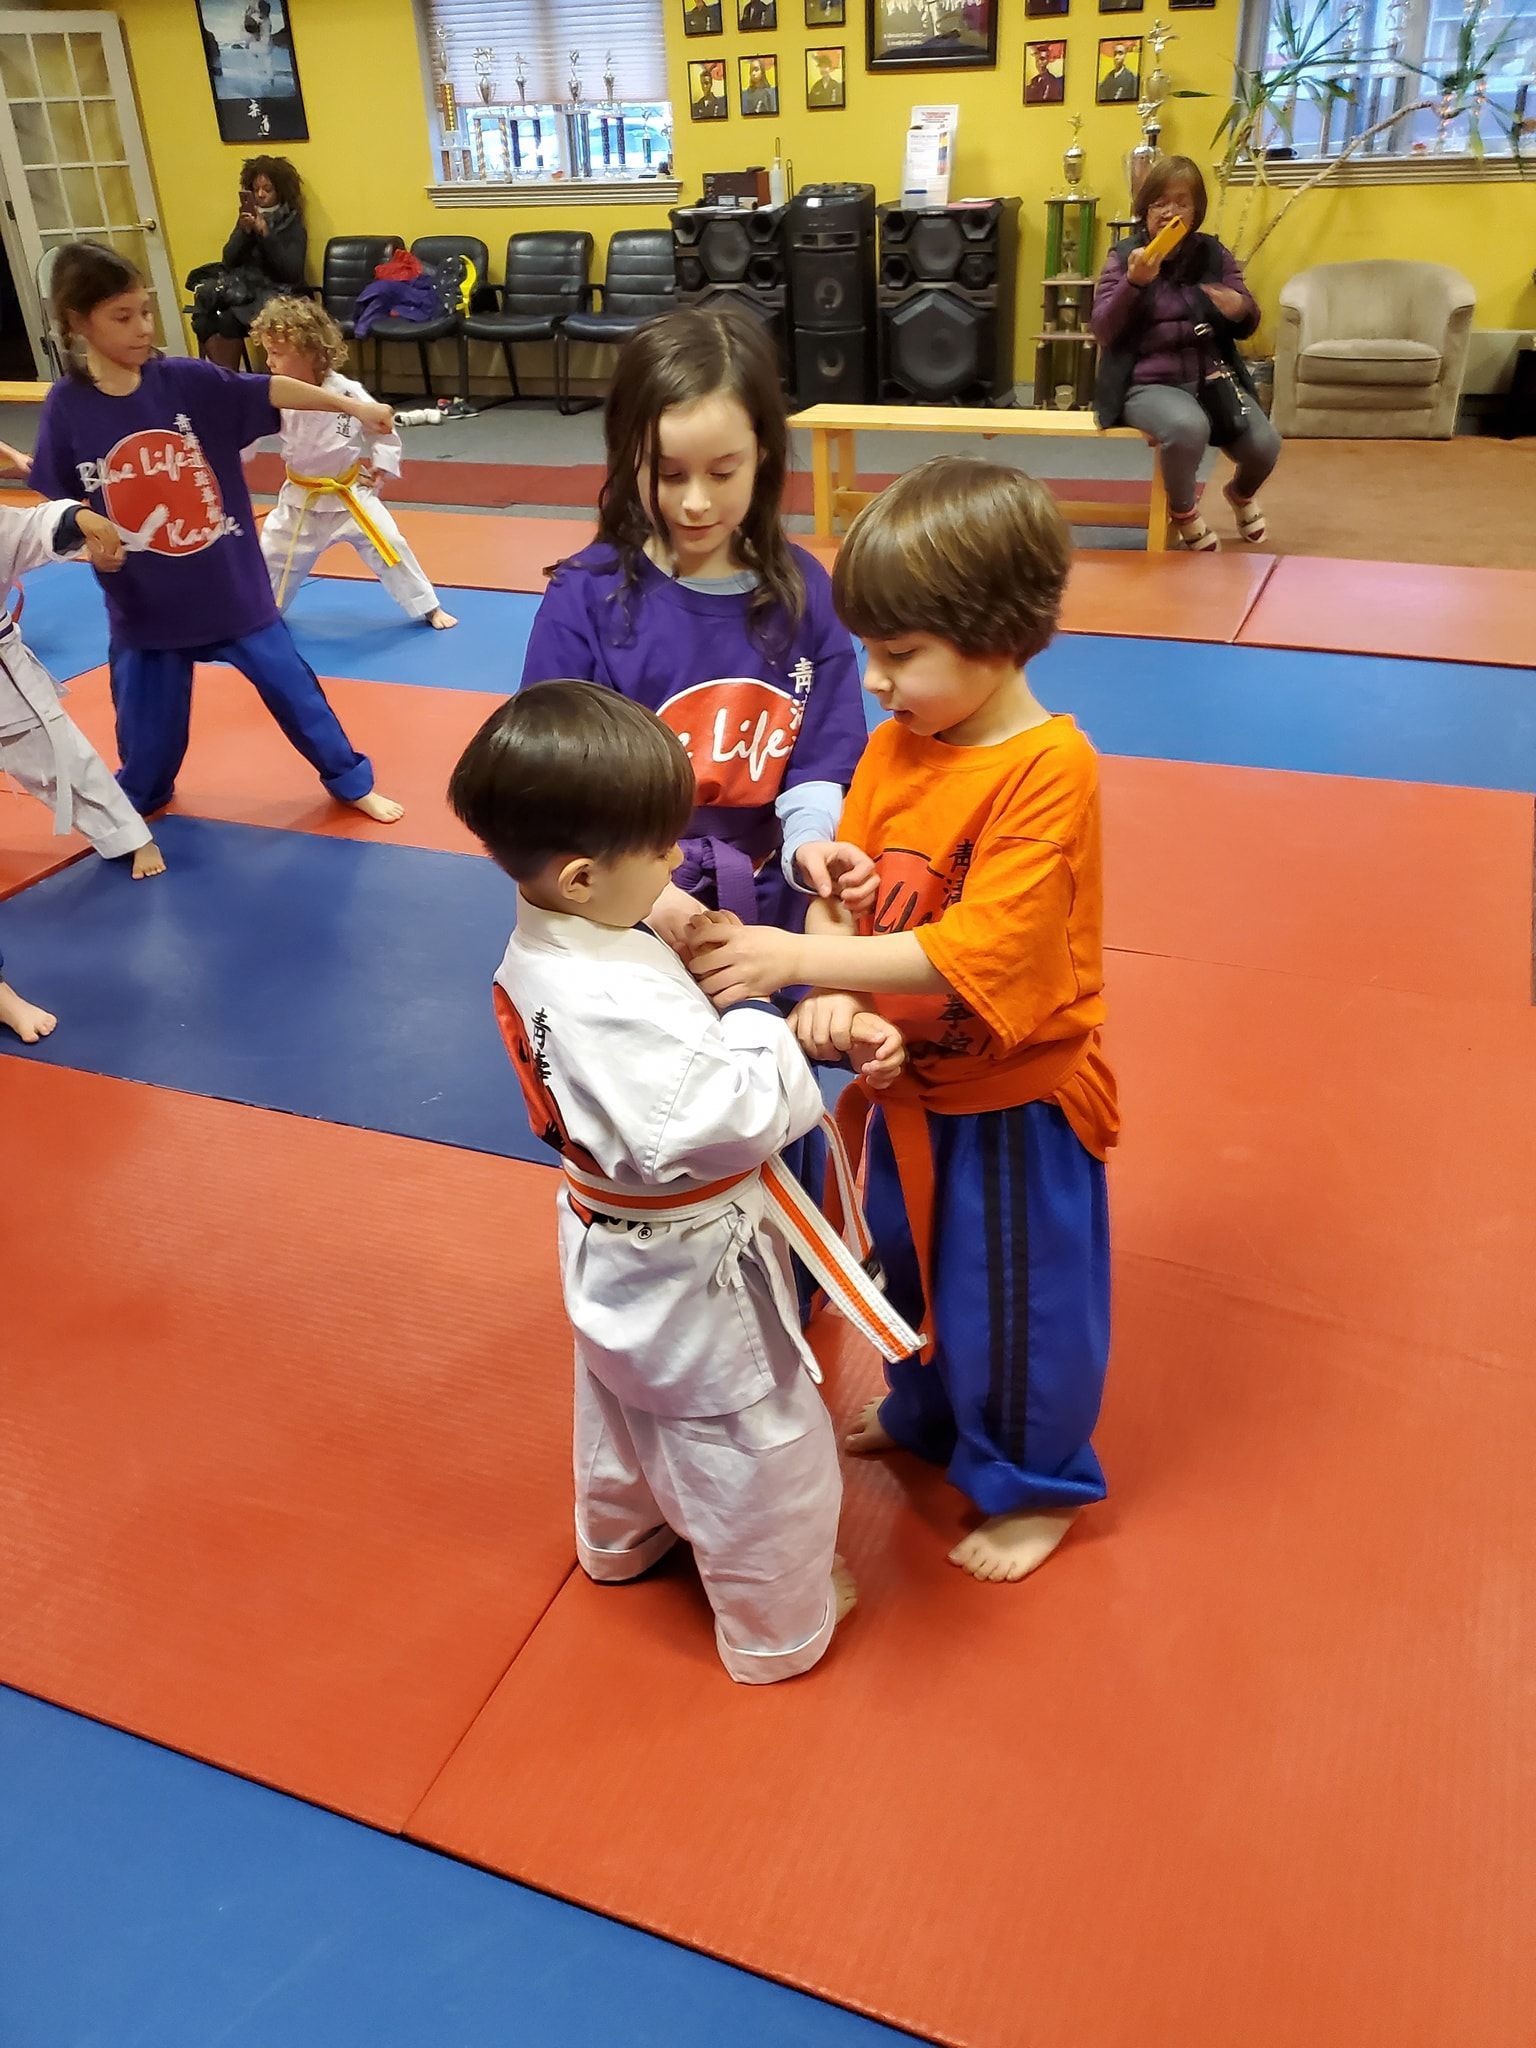 a group of young children are practicing martial arts in a gym .